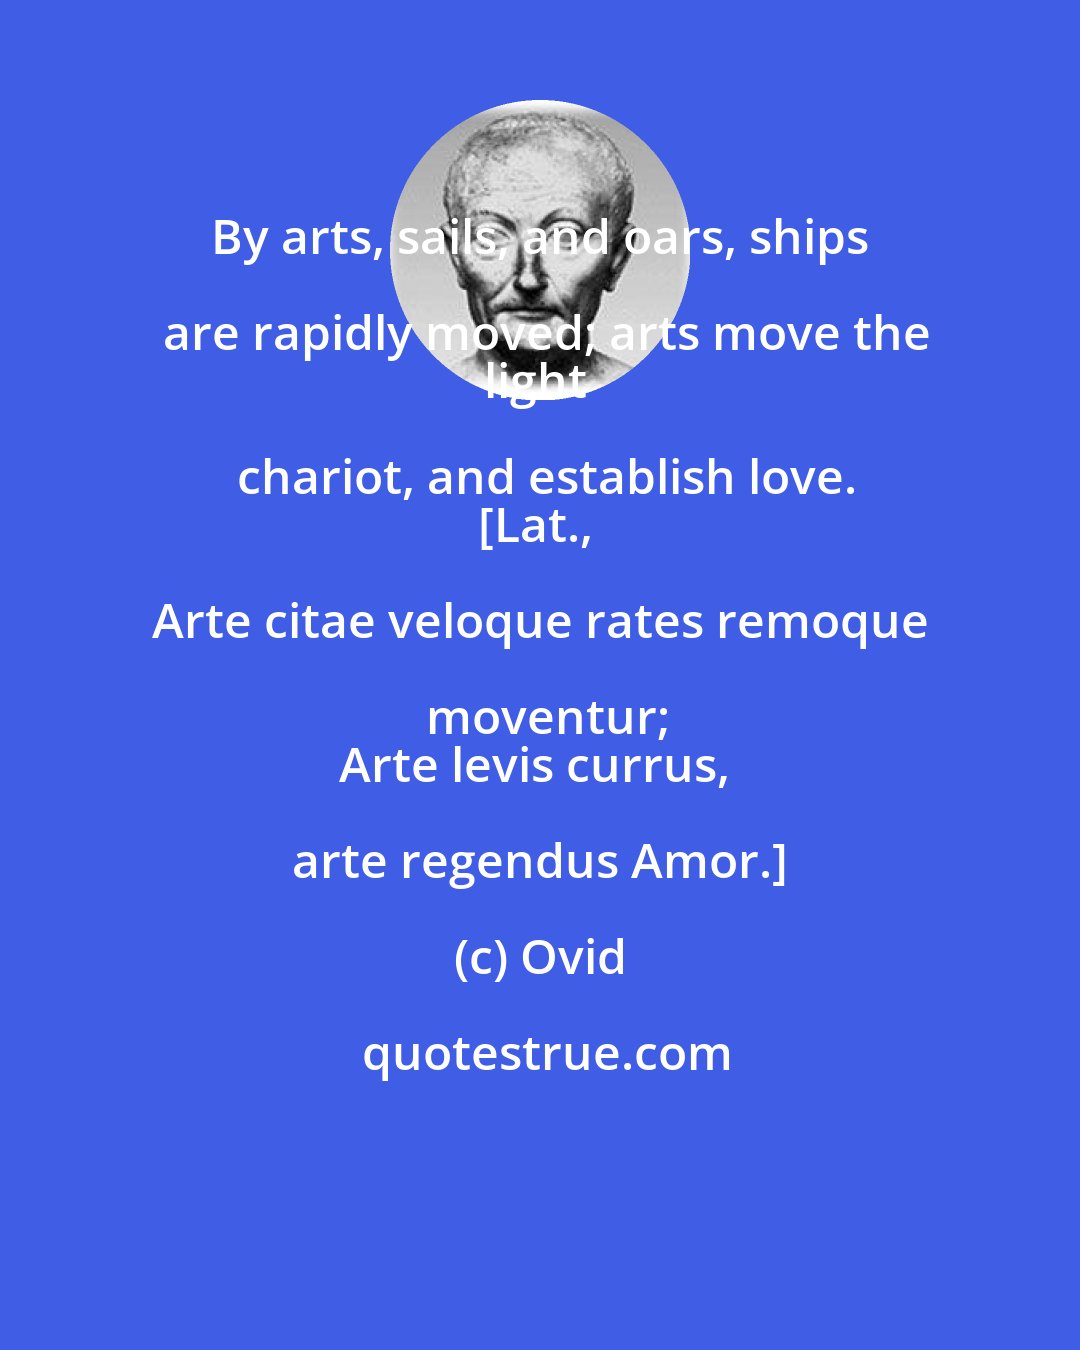 Ovid: By arts, sails, and oars, ships are rapidly moved; arts move the
light chariot, and establish love.
[Lat., Arte citae veloque rates remoque moventur;
Arte levis currus, arte regendus Amor.]